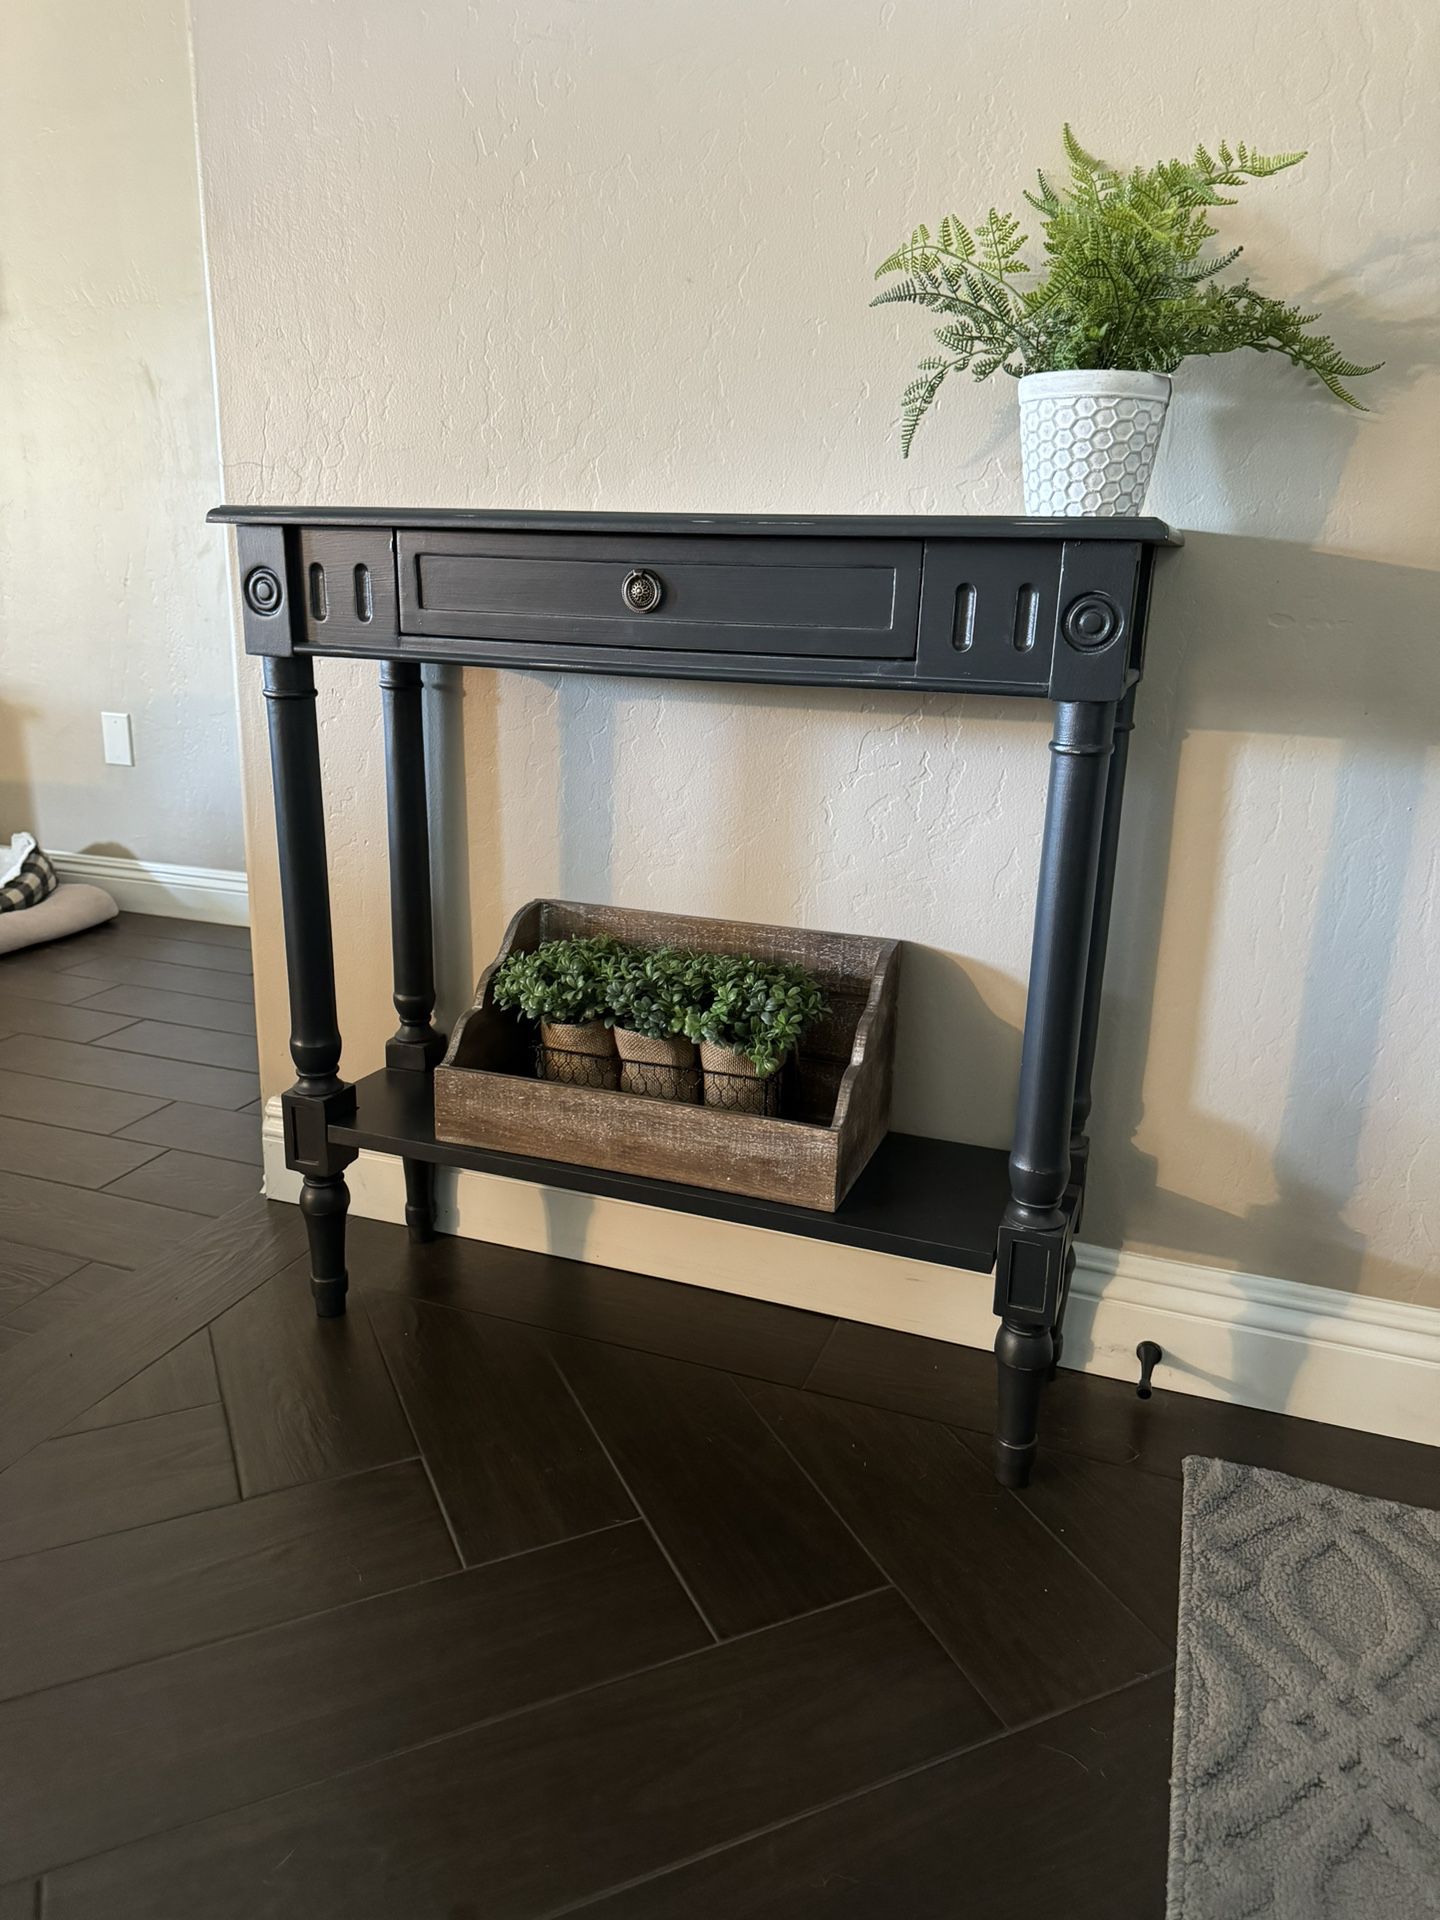 Reynolds SOLID wood Console Table